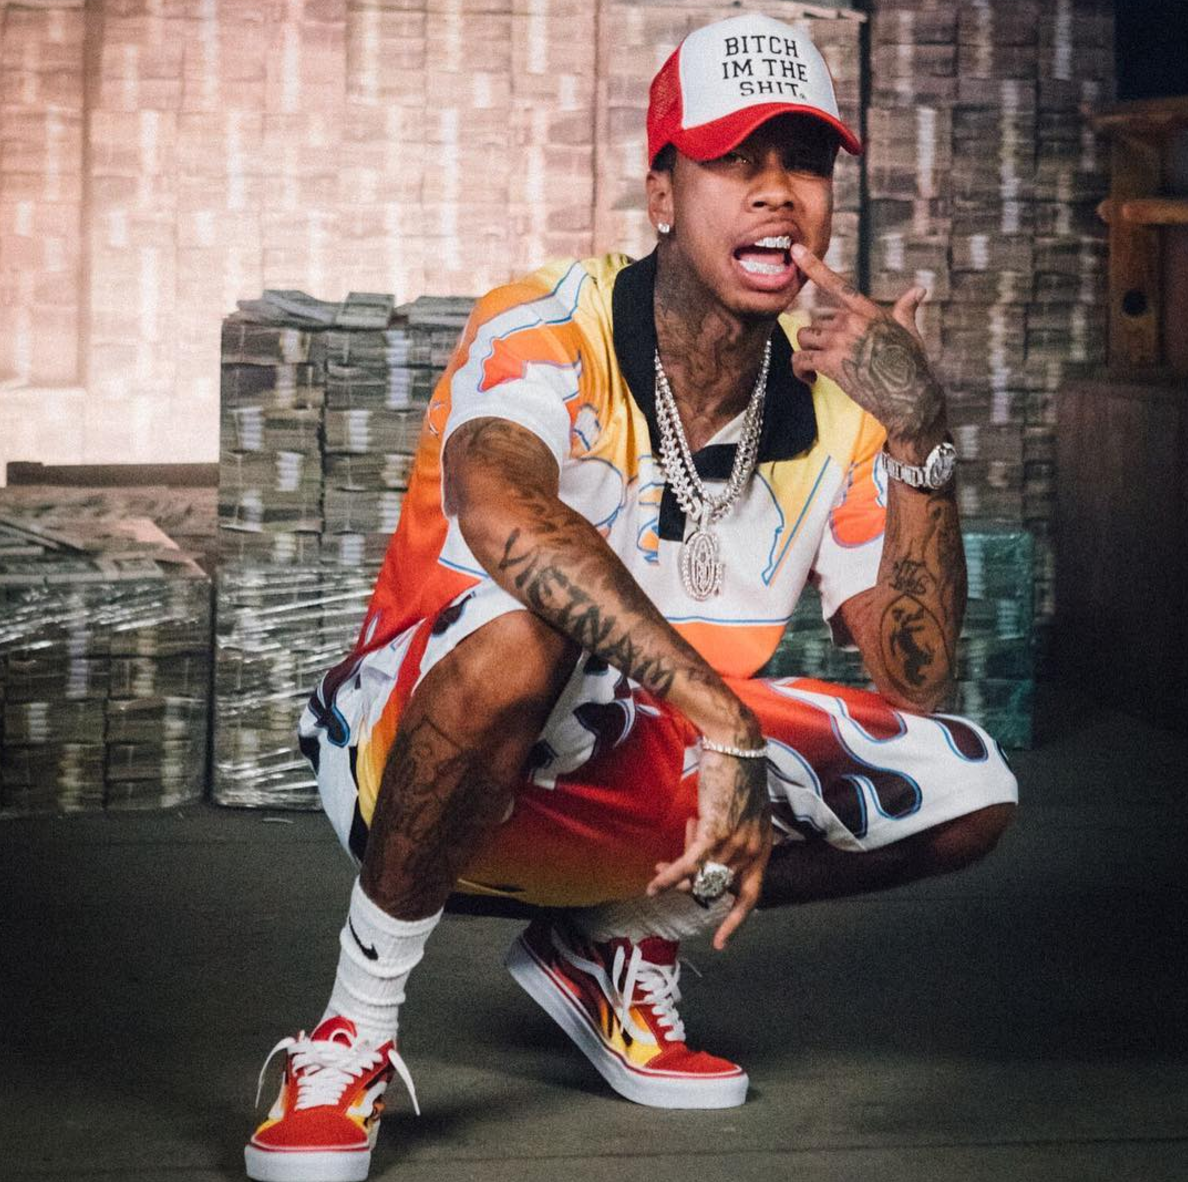 SPOTTED: Tyga In Flame Print Polo Shirt And Shorts And Custom Vans Sneakers